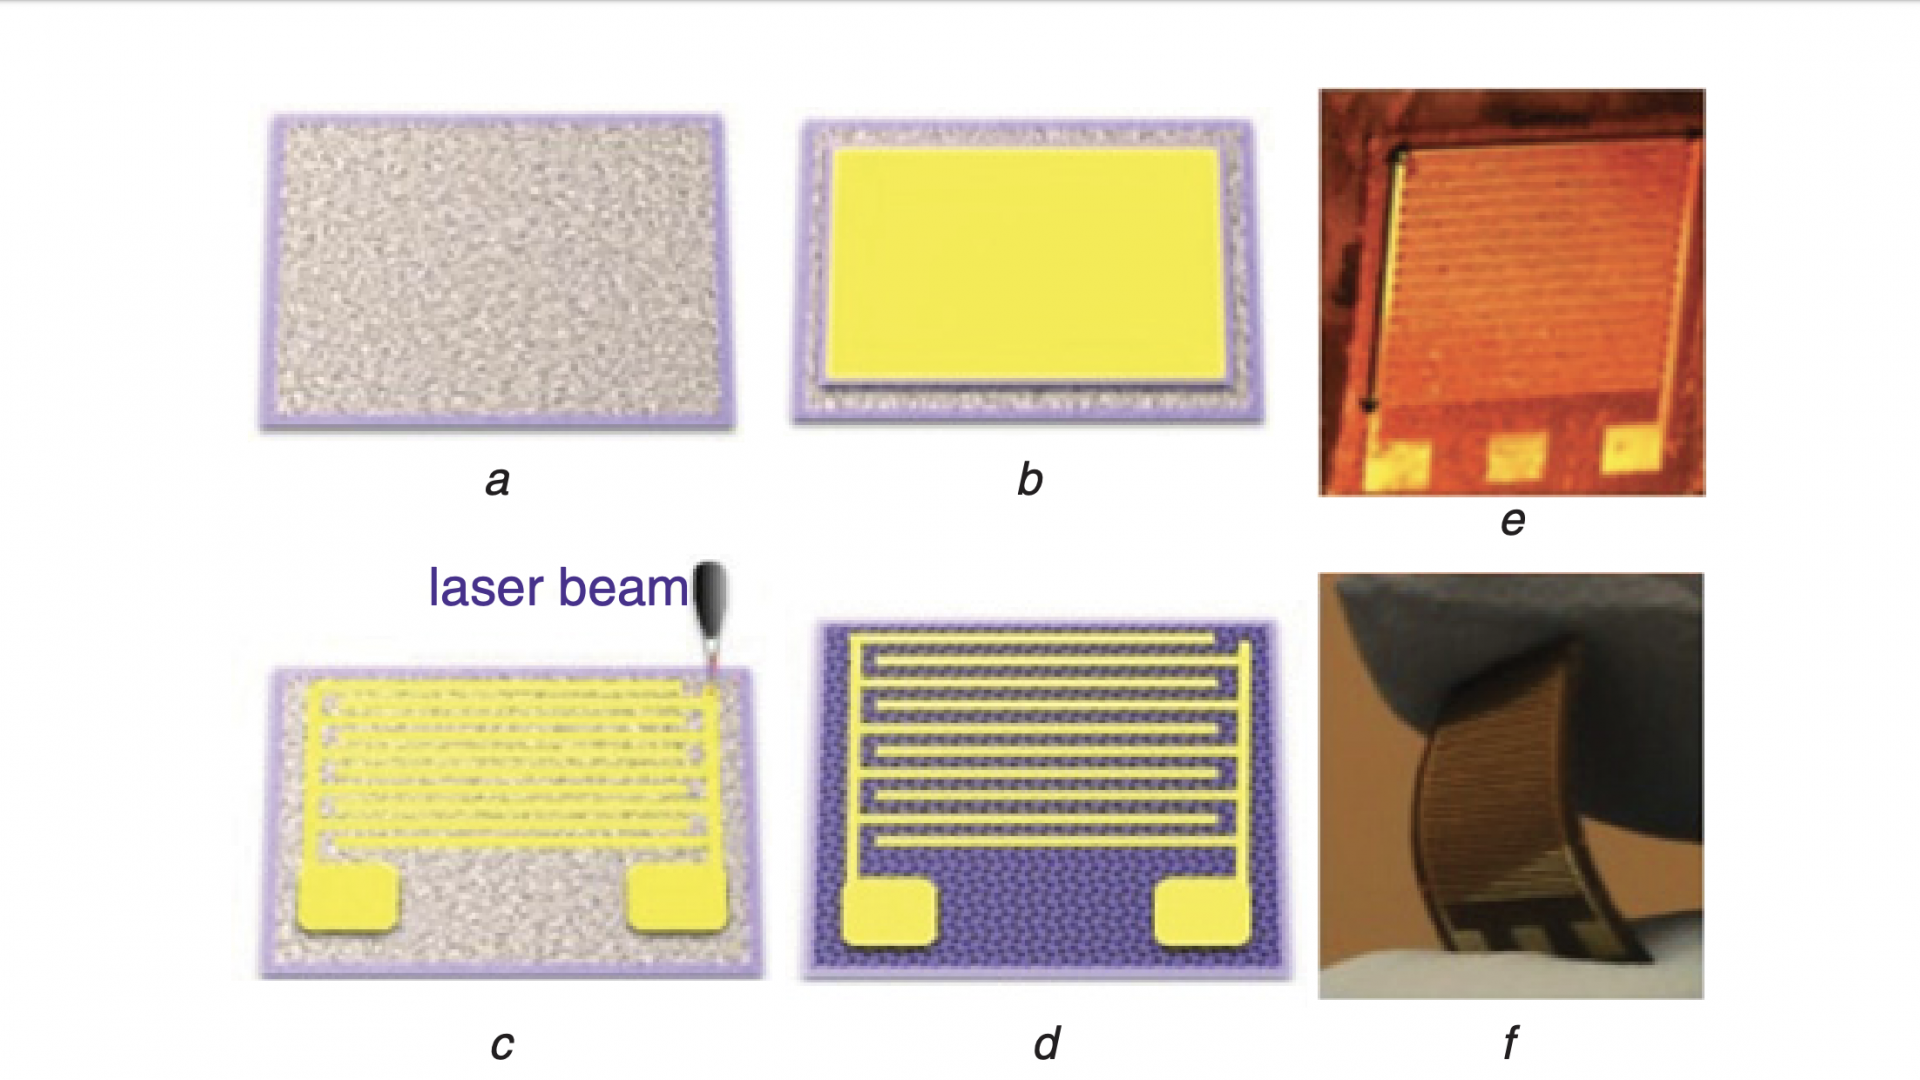 Flexible low-cost cardiovascular risk marker biosensor for point-of-care applications